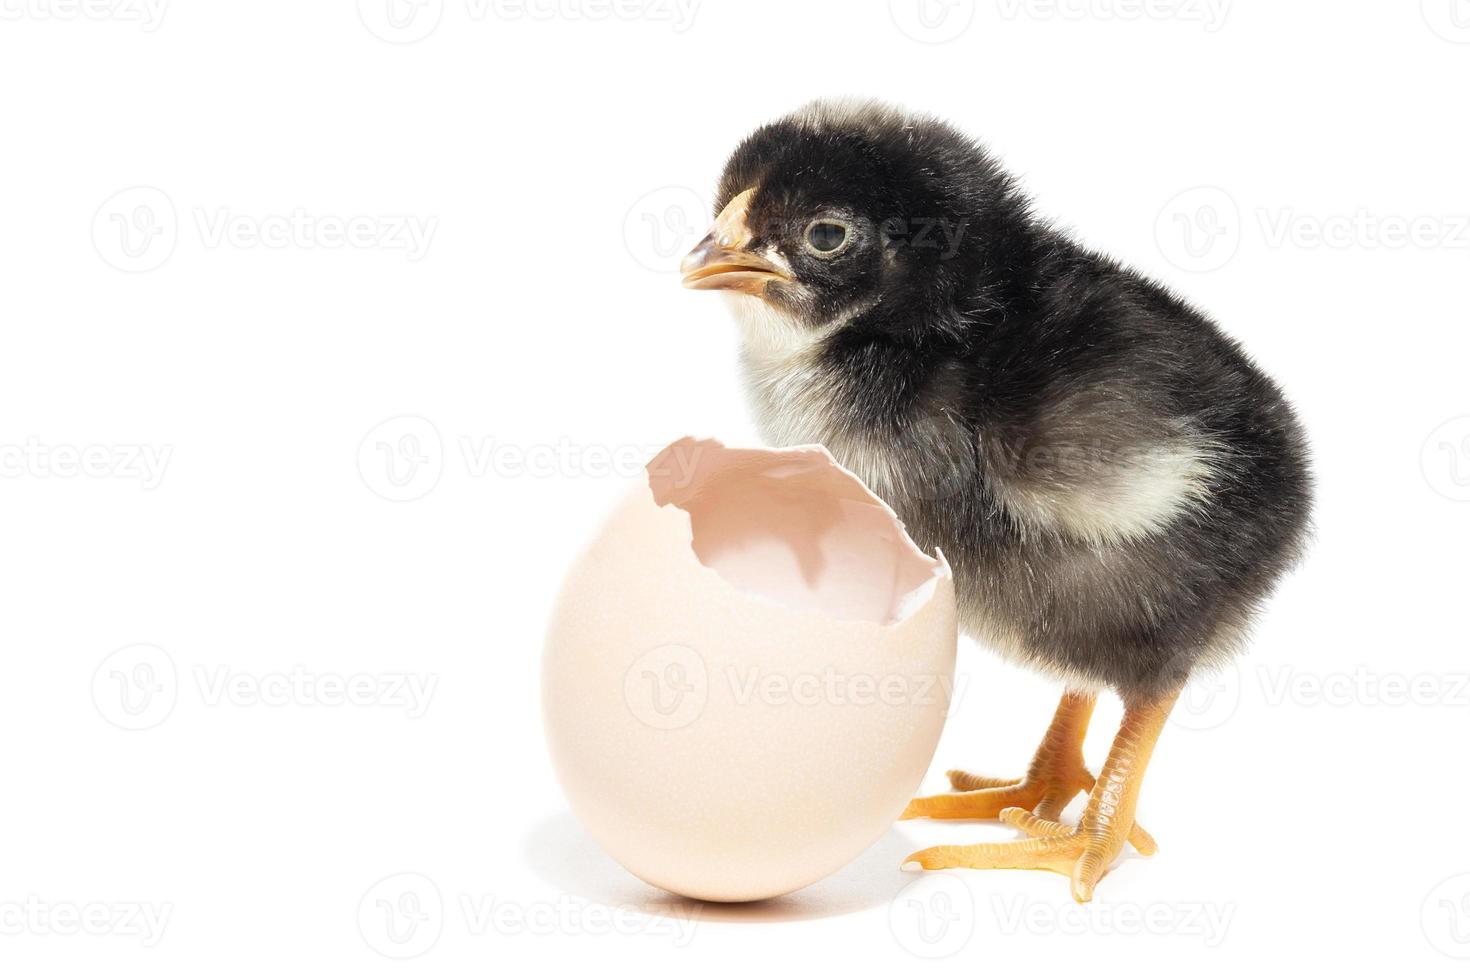 Chicken hatched from the shell photo